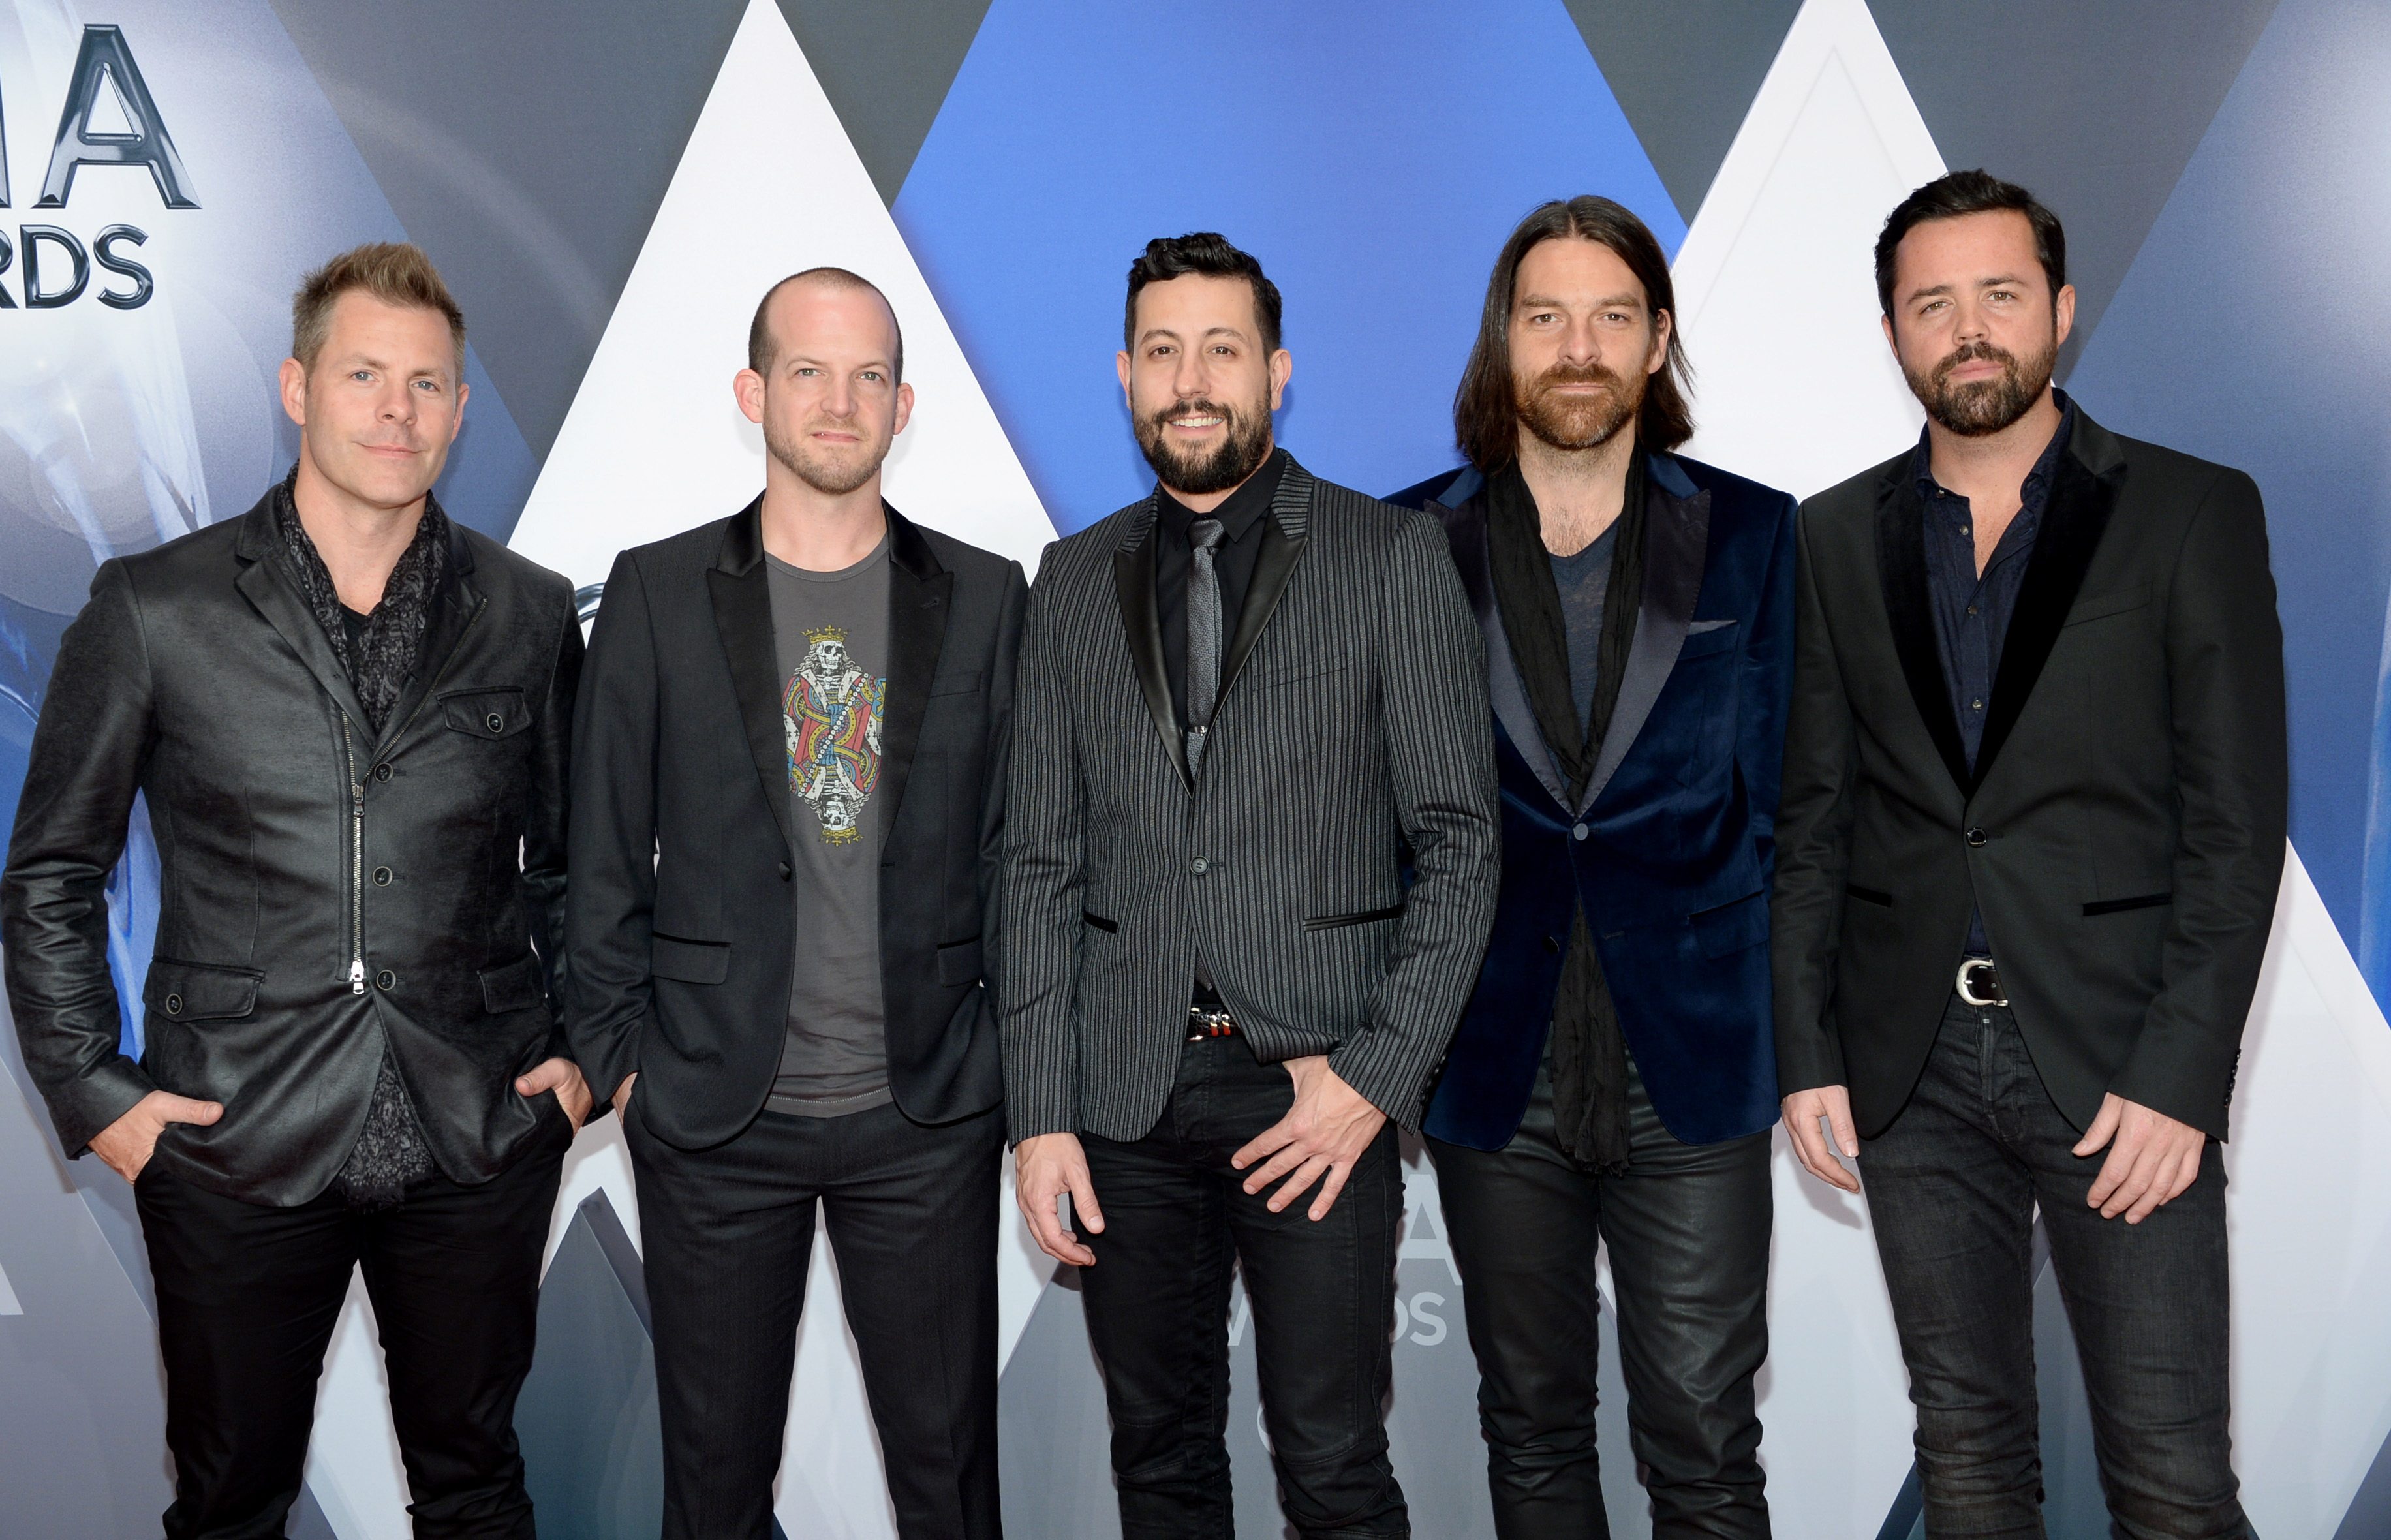 When members of Old Dominion -- from left, Trevor Rosen, Whit Sellers, Matthew Ramsey, Geoff Sprung and Brad Tursi -- saw their name on the voting ballots for the 51st Academy of Country Music Awards, which will be held Sunday, for both new vocal duo/group of the year and vocal group of the year, the whole thing felt like a joke on them.